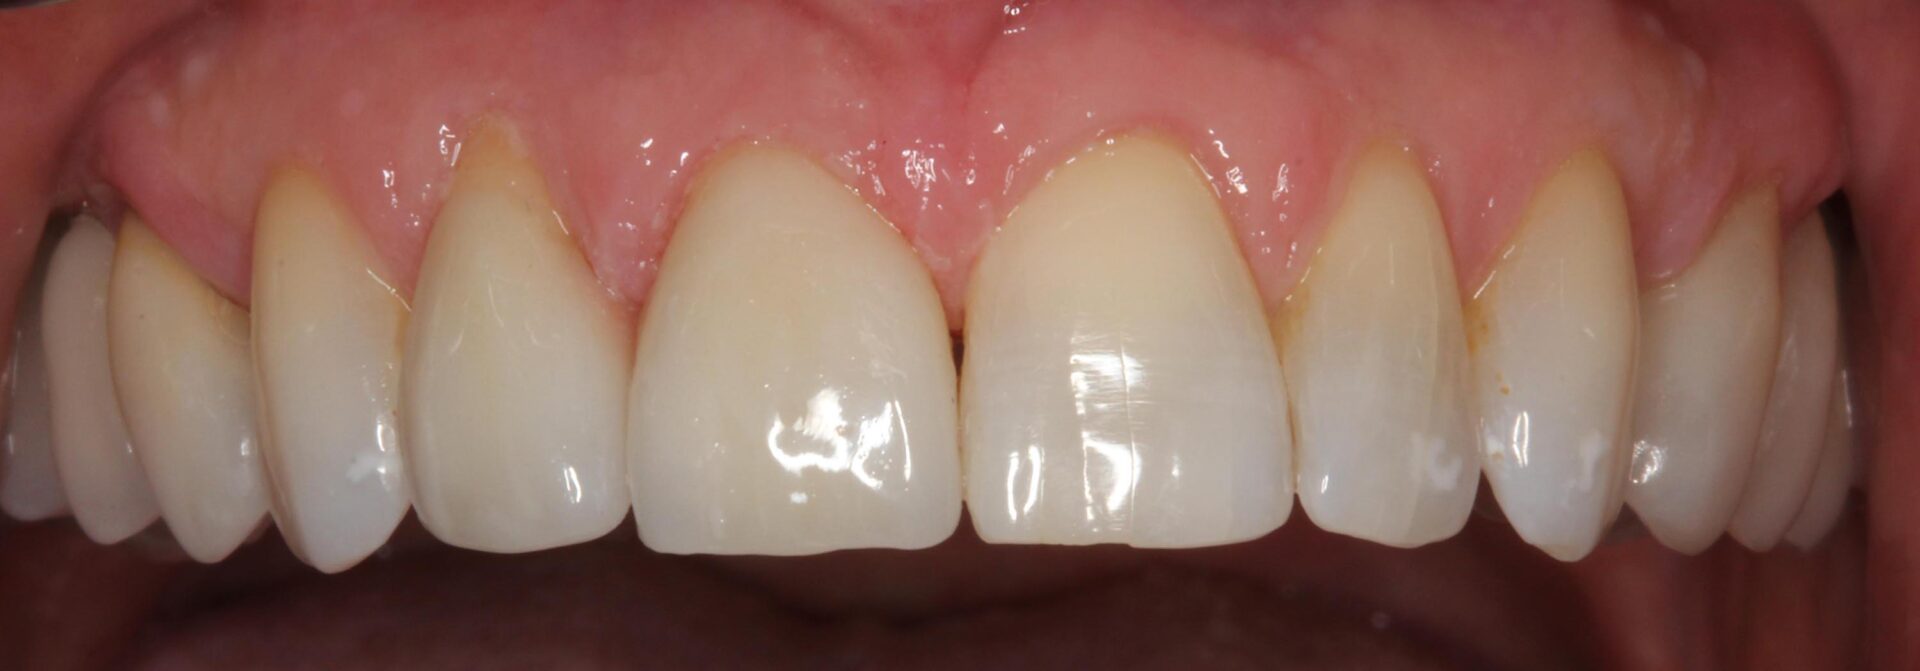 Tooth and crown ceramic restorations